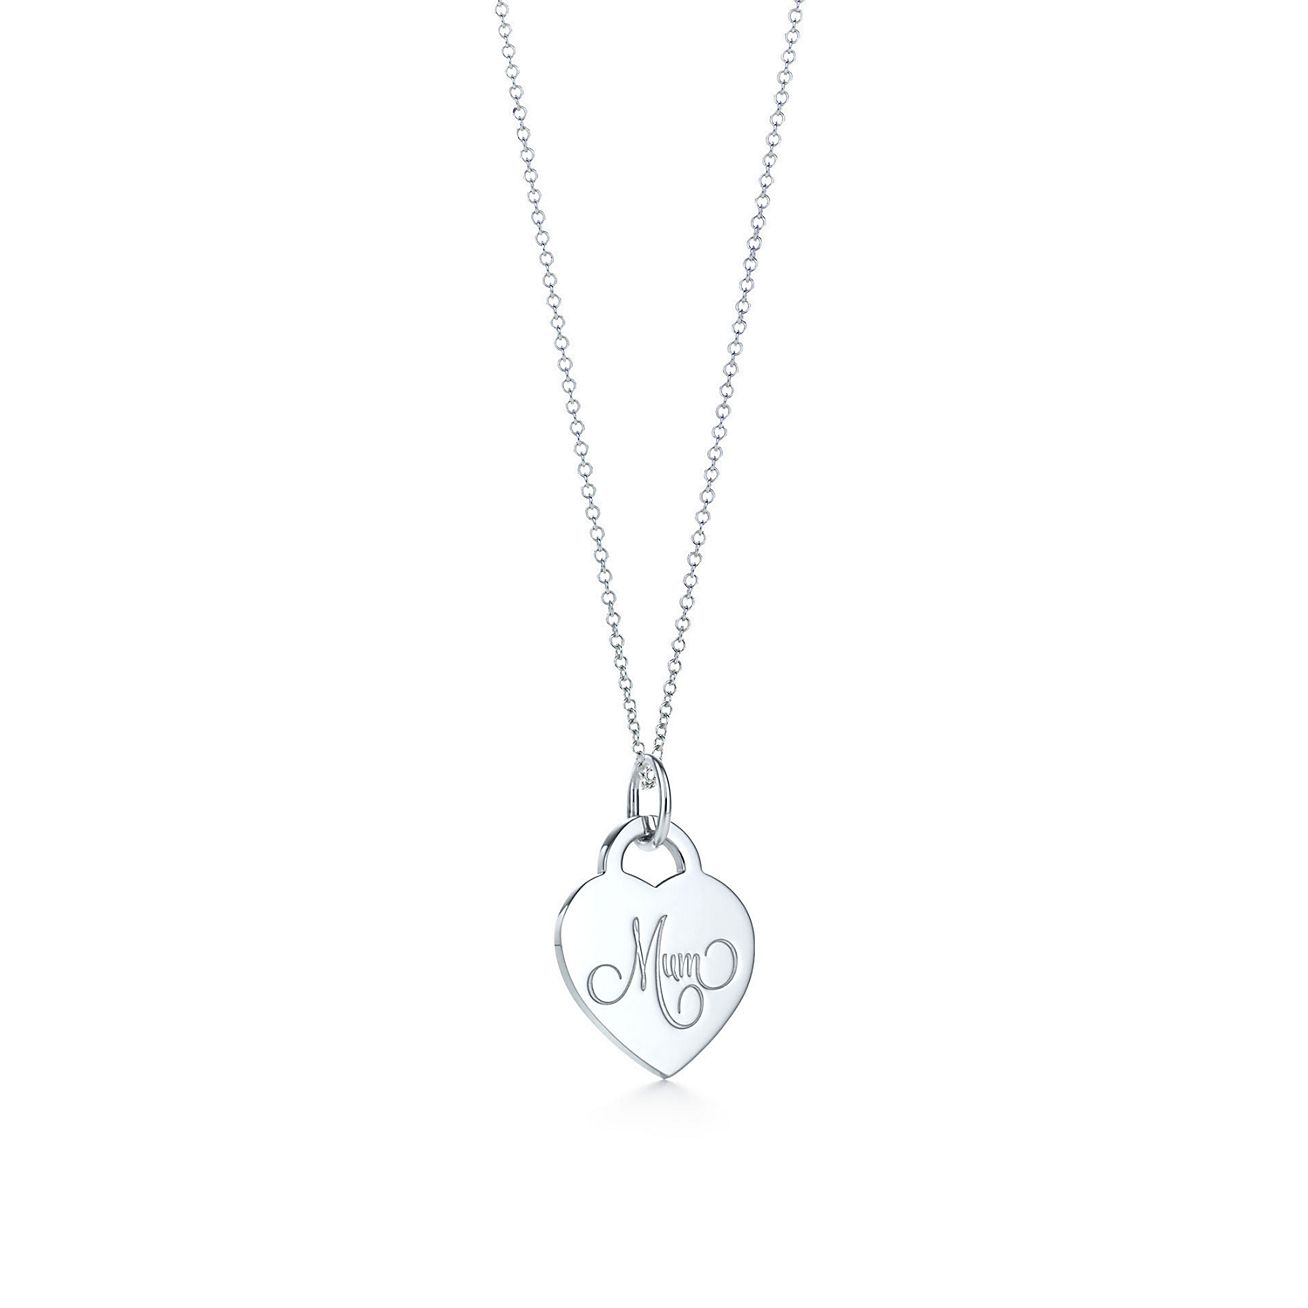 Mum Necklace in Silver with Diamonds in Sterling Silver | MYKA